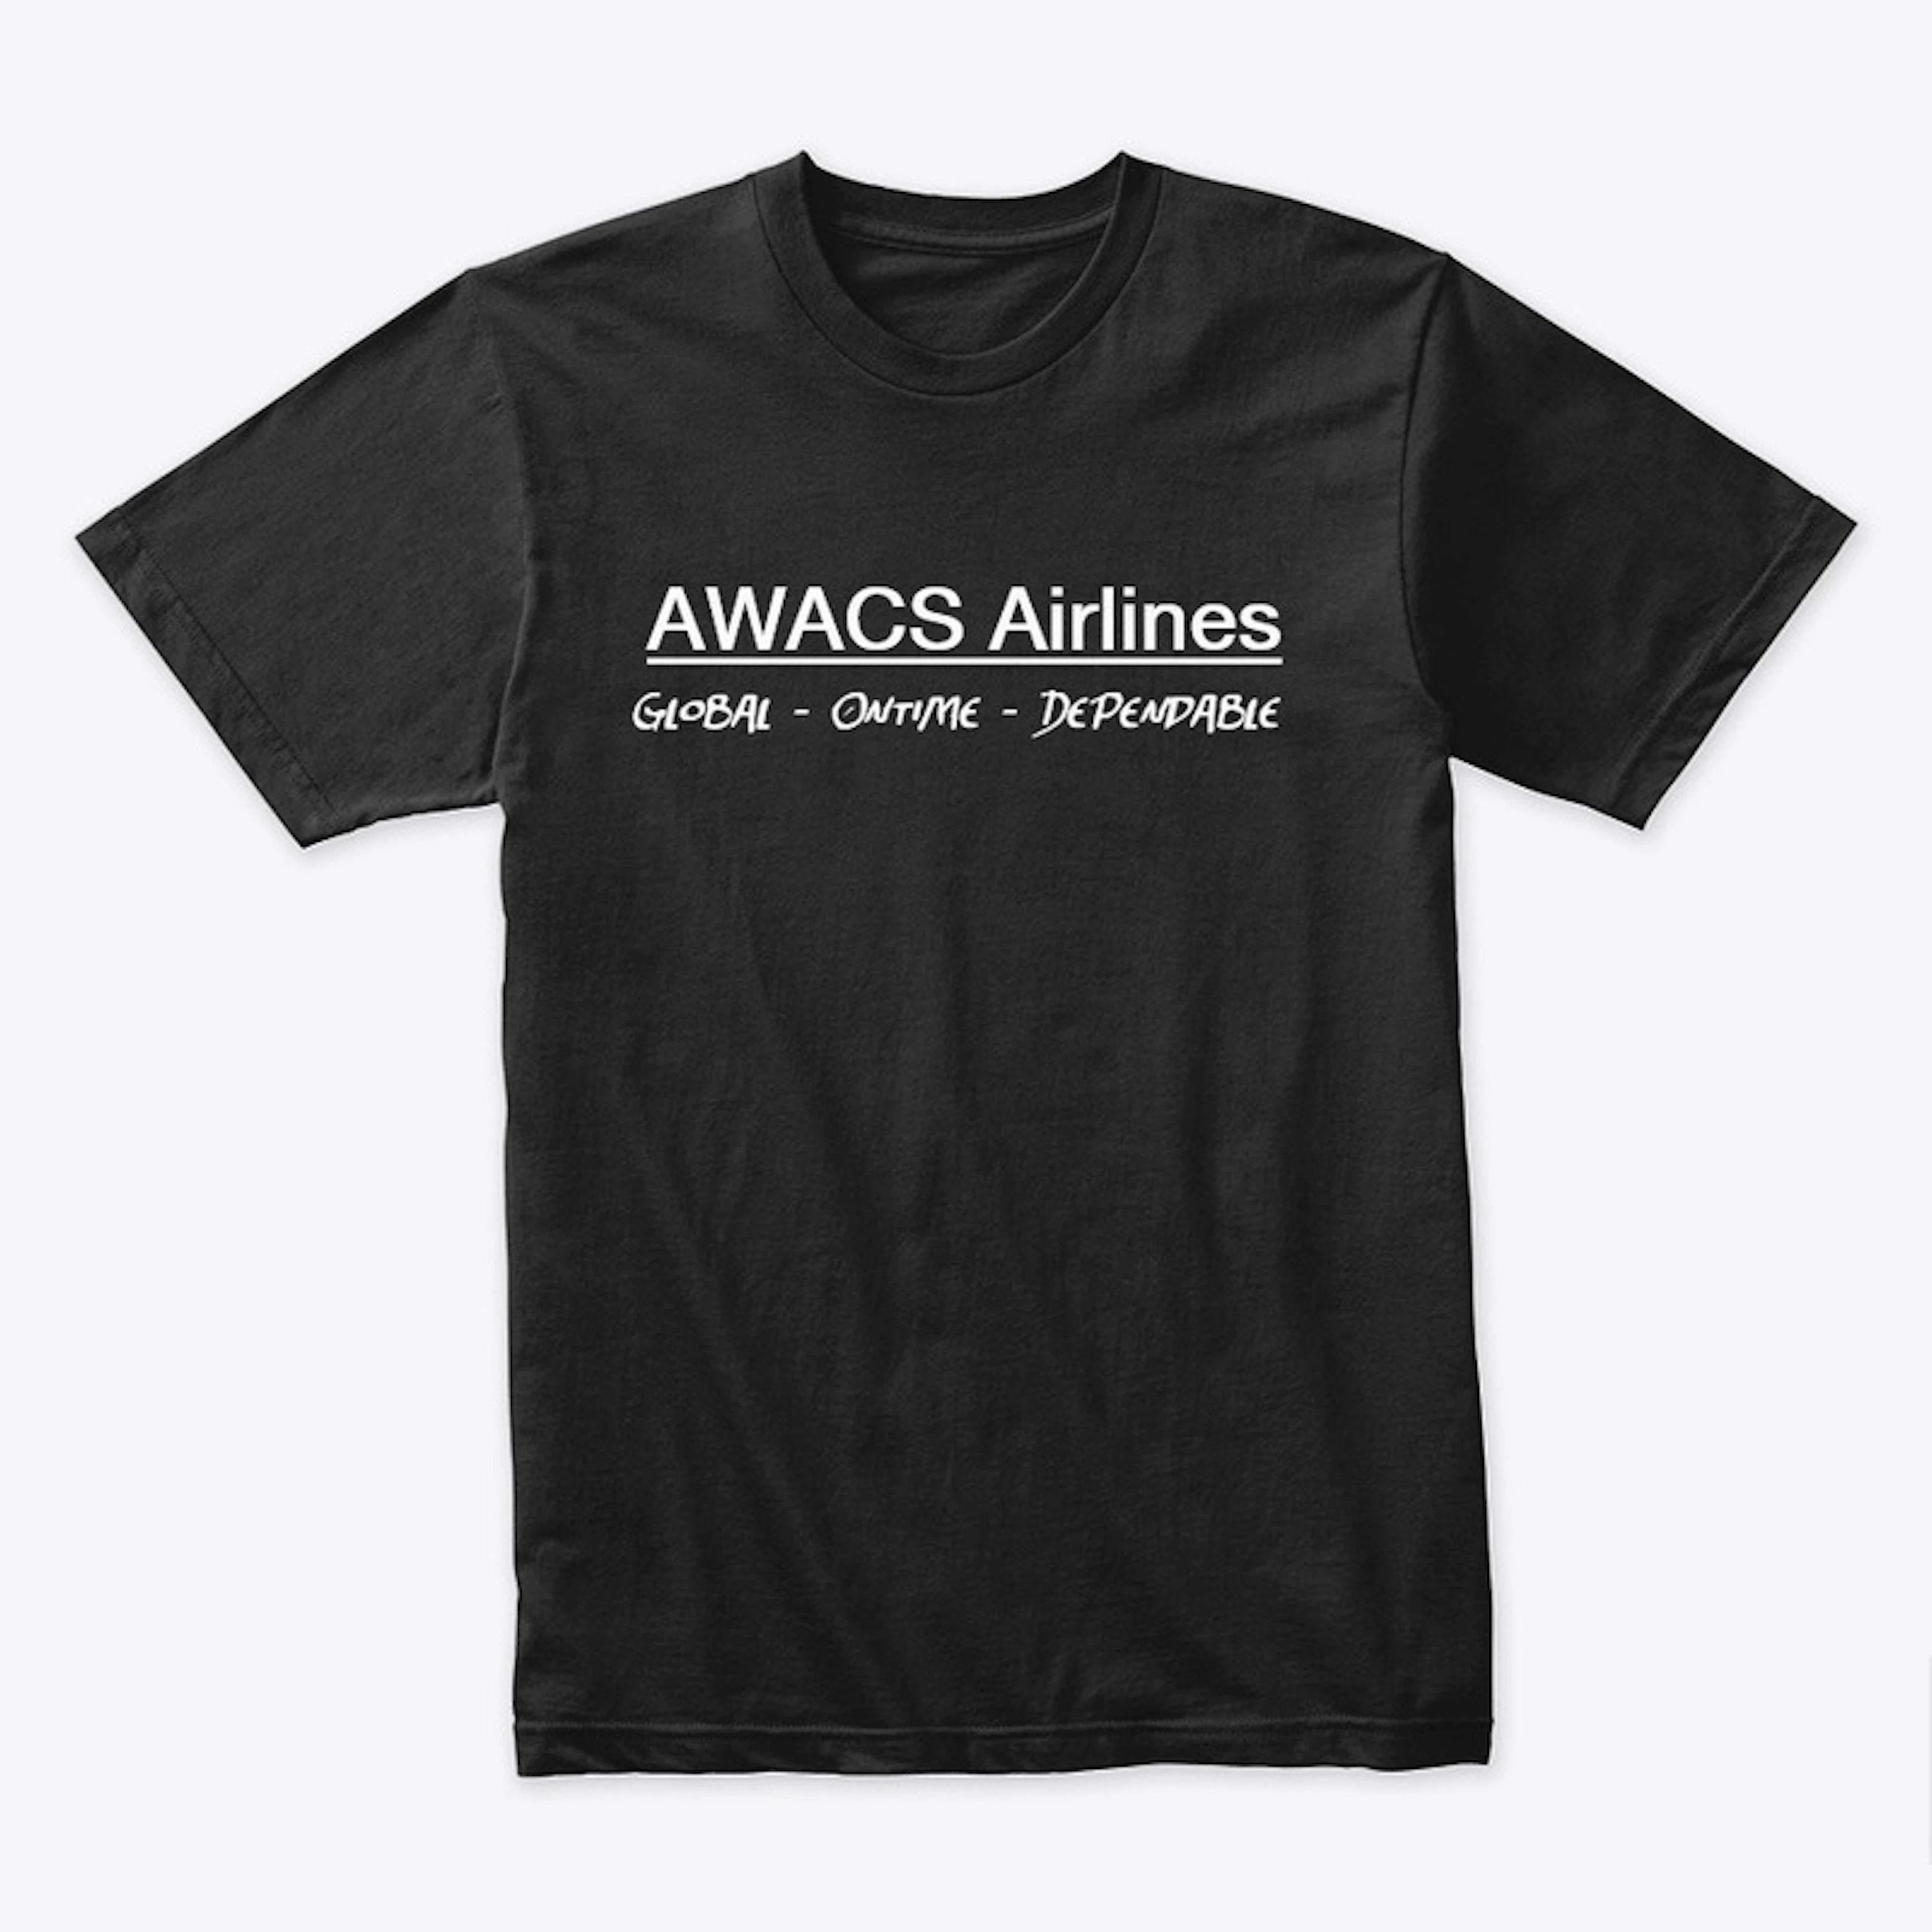 AWACS Airlines Ladies